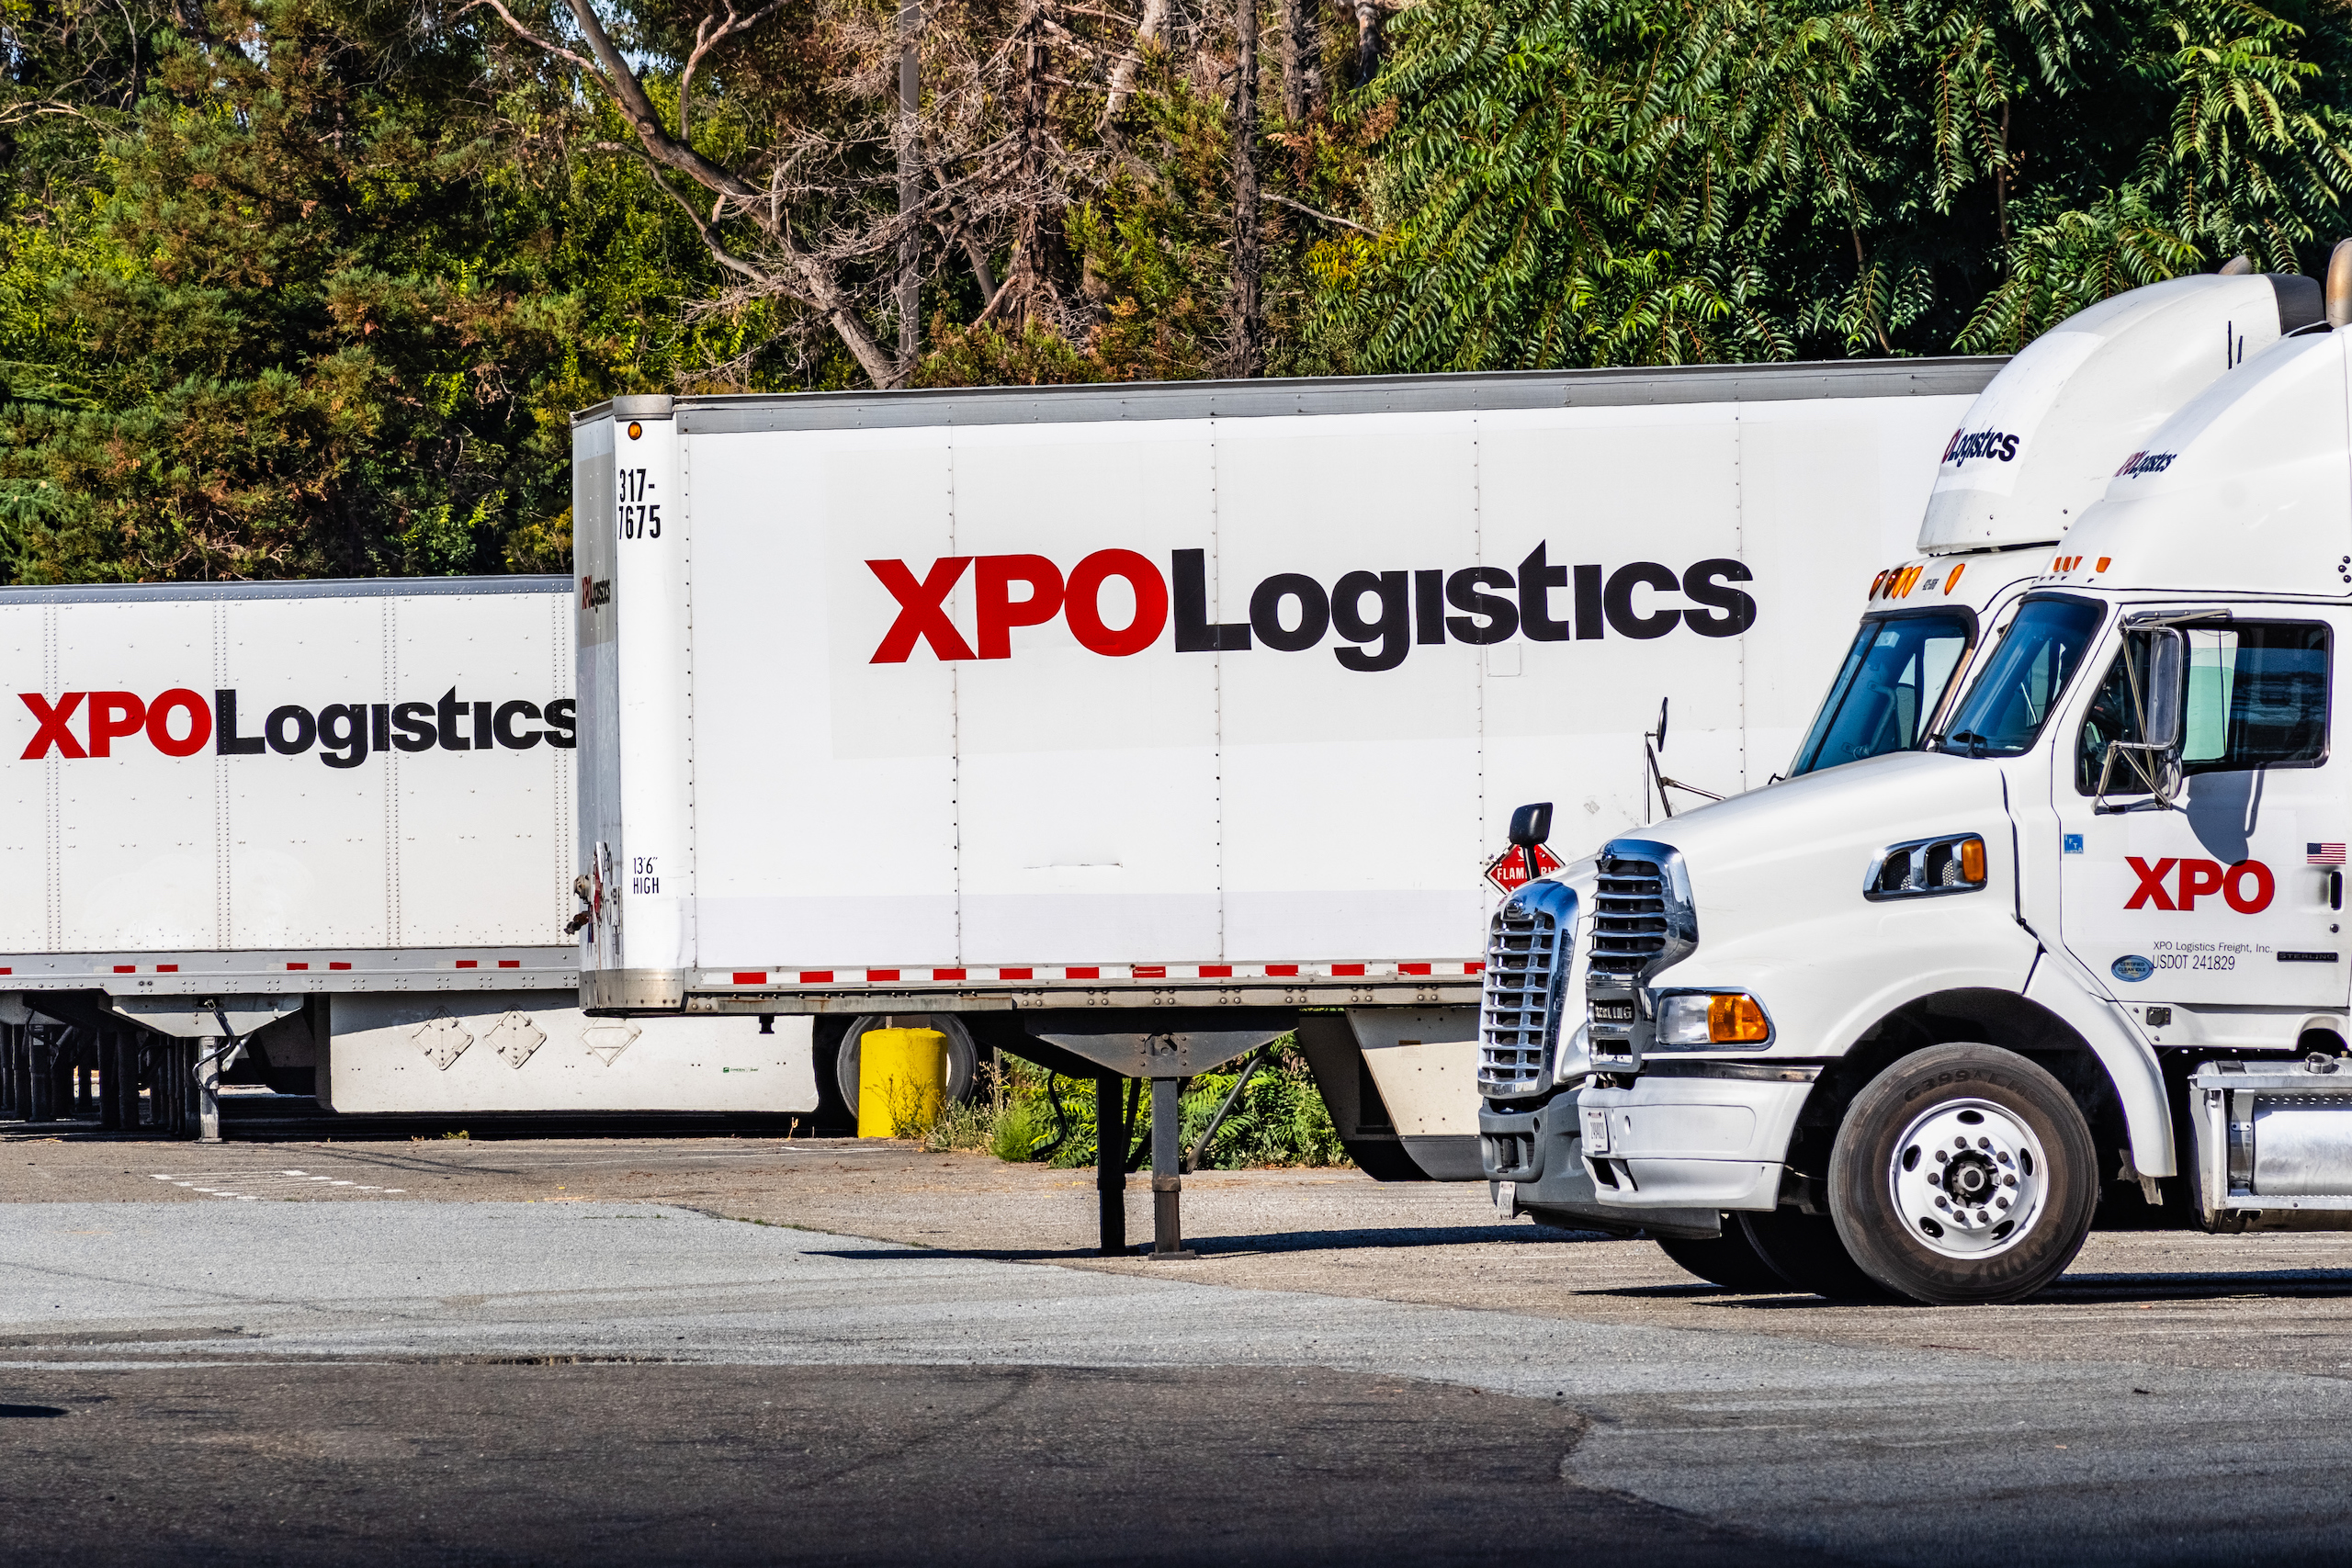 July 31, 2019 San Jose / CA / USA - XPO Logistics distribution point in San Francisco bay; XPO Logistics, Inc. is one of the 10 largest providers of transportation and logistics services in the world